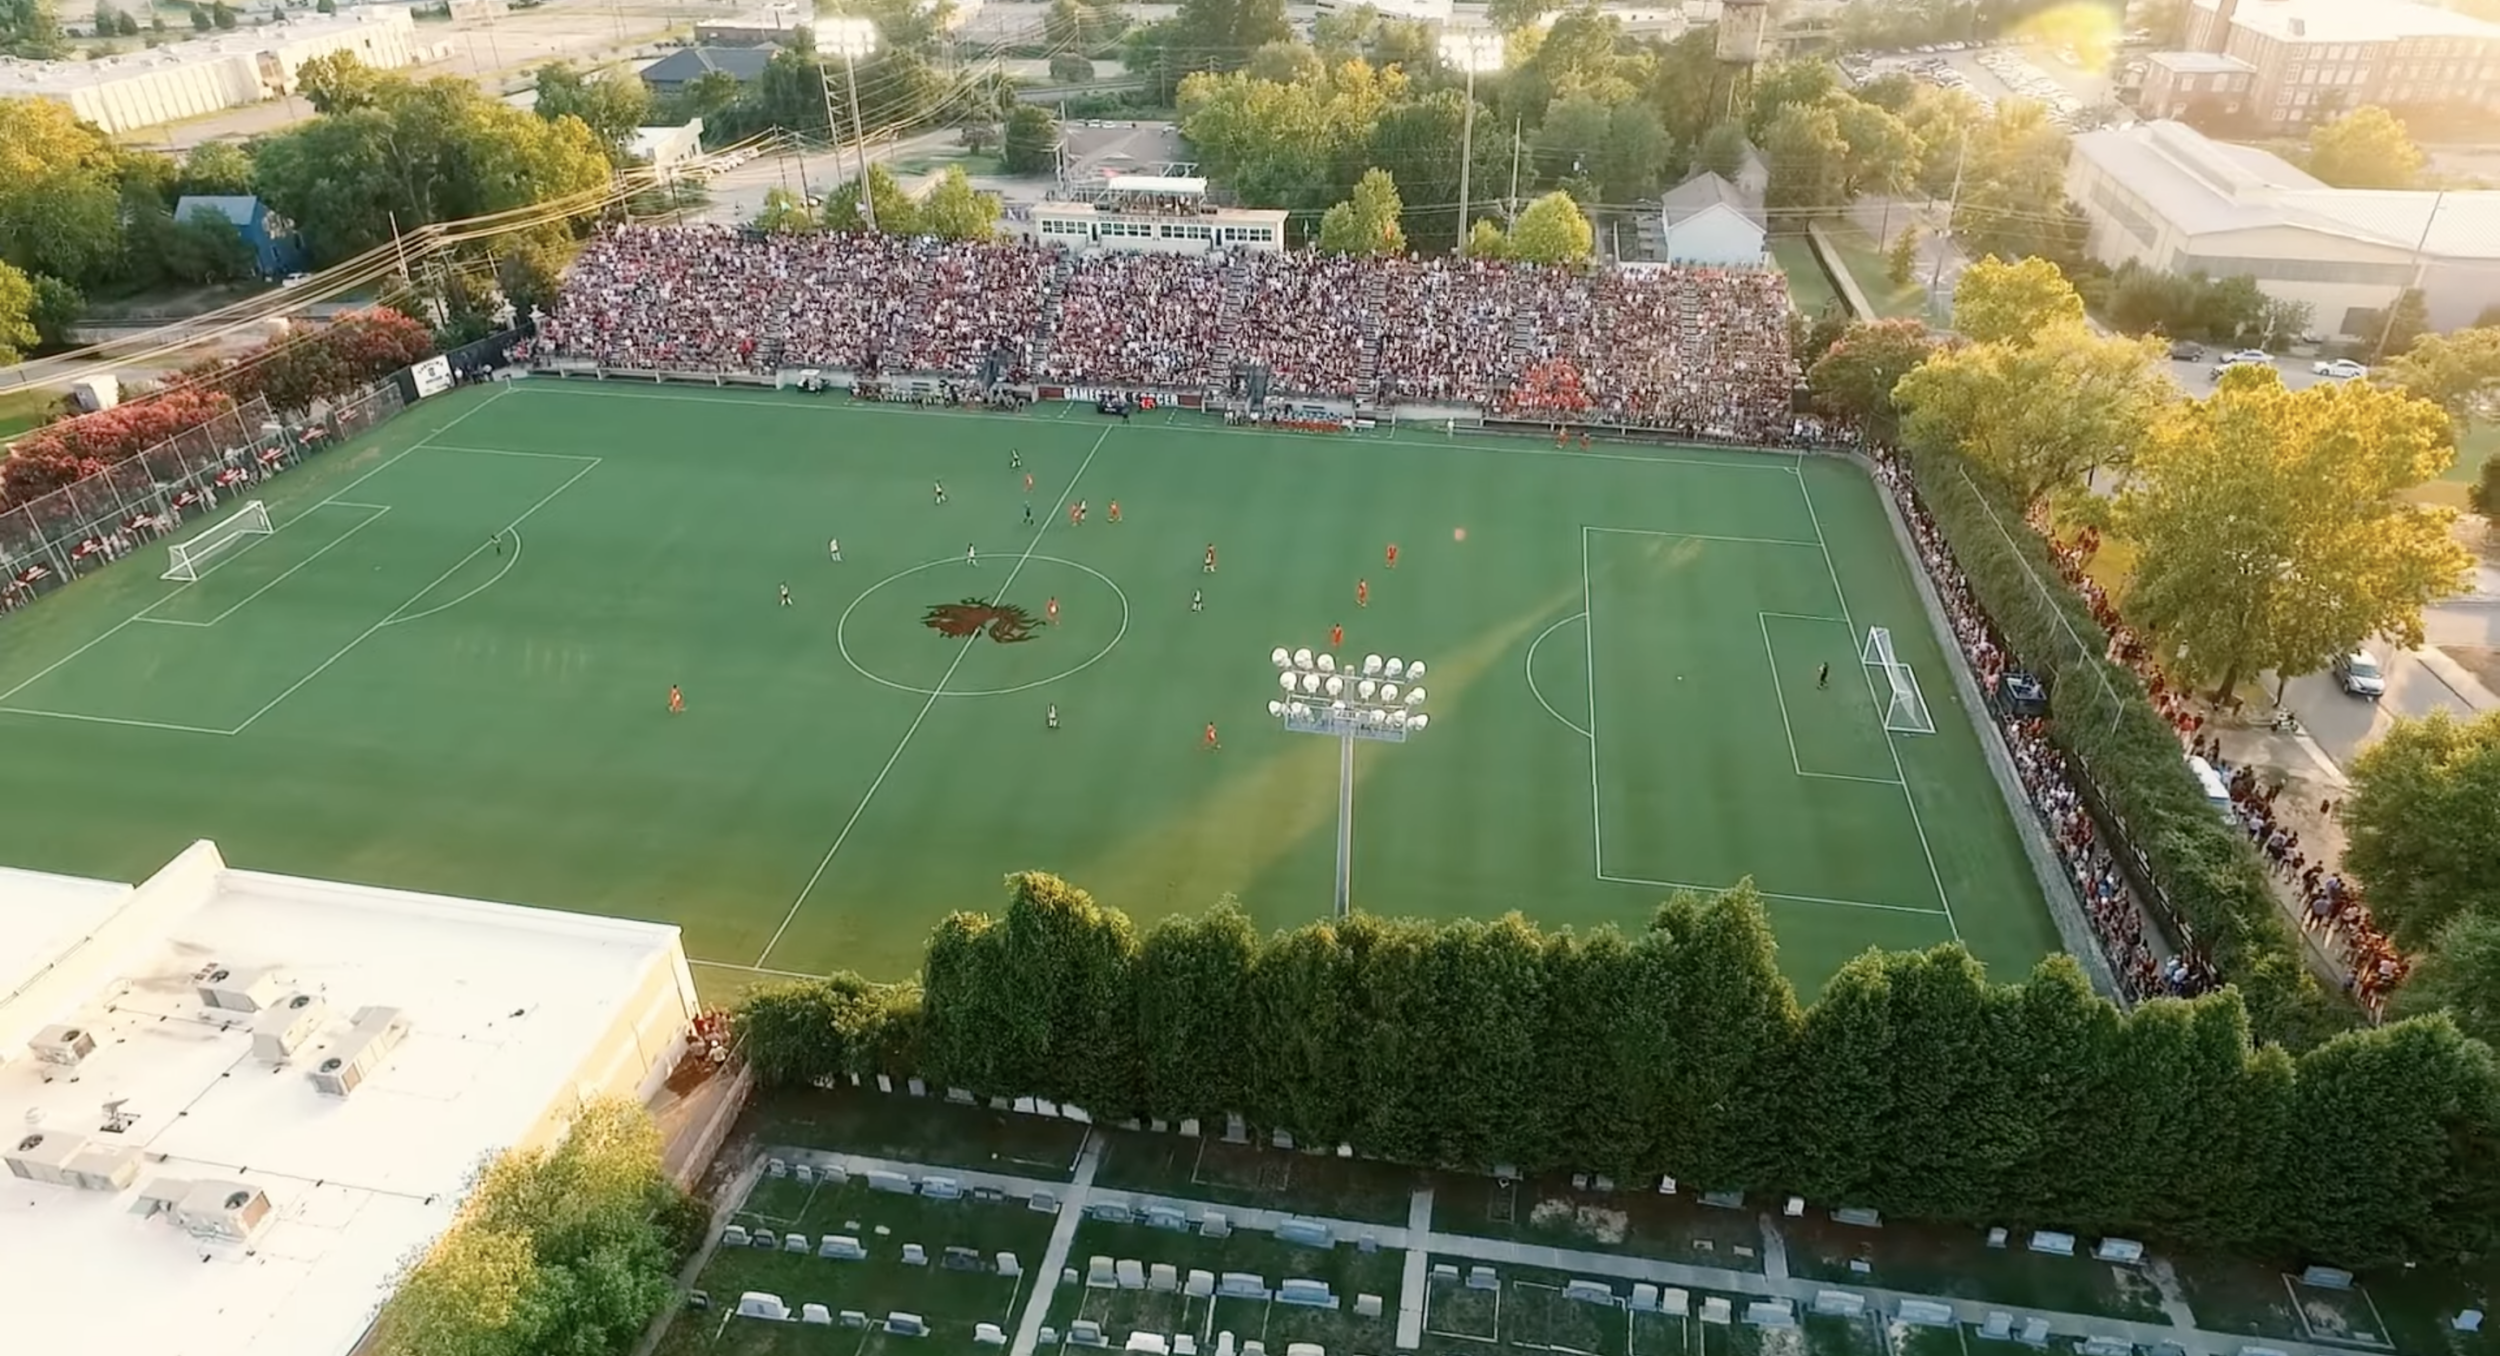 Gamecock Soccer | At Last, Rivals In Red Athletic Hype Video